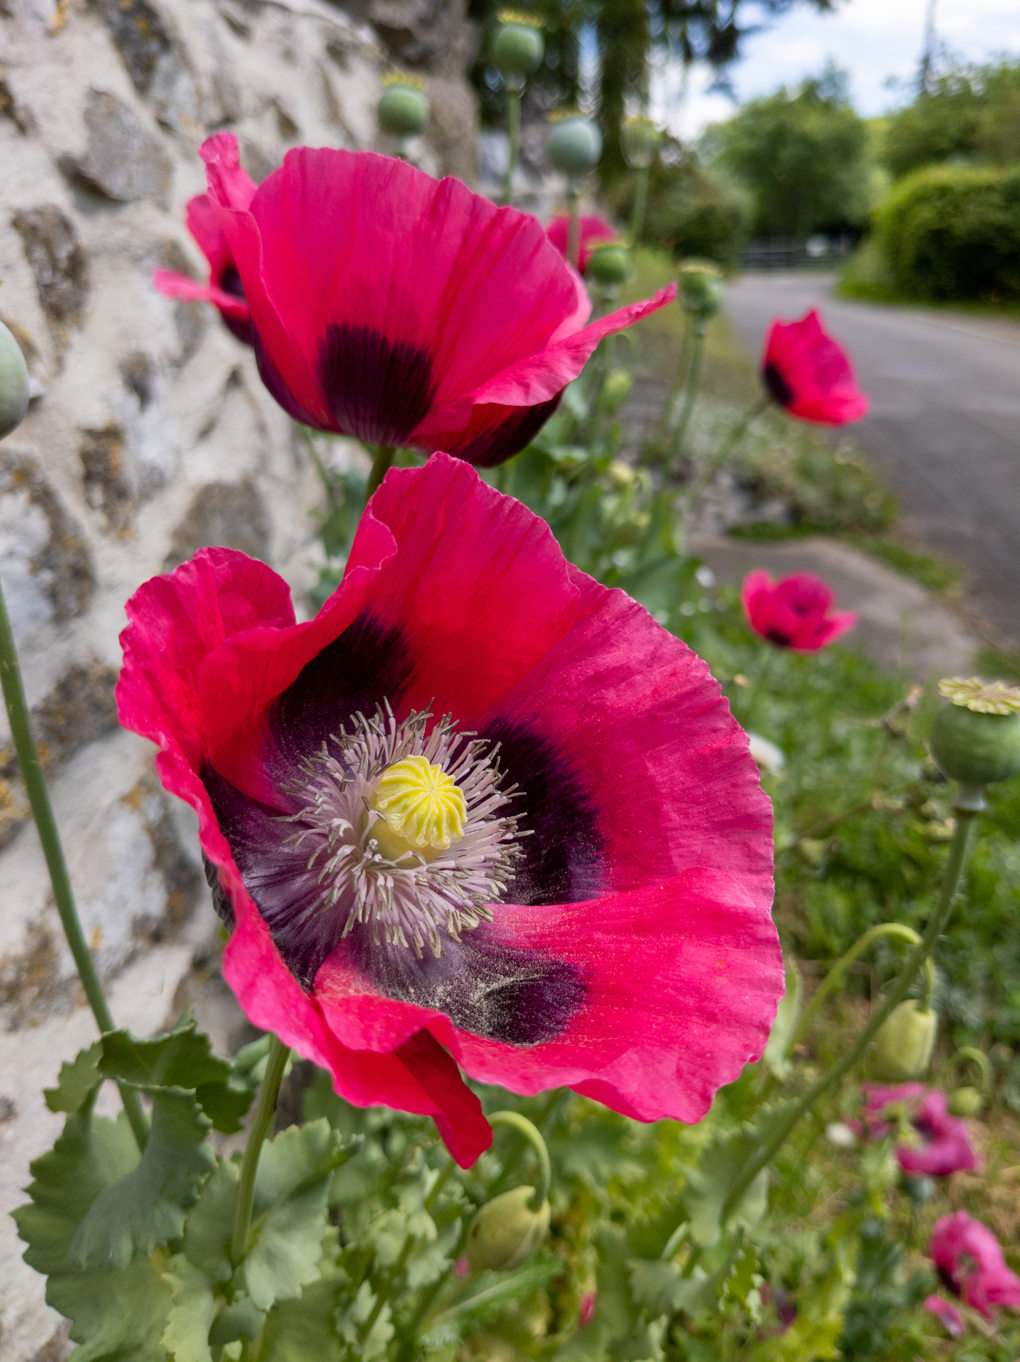 Bright pink poppies with green stems and leaves, in front of a grey stone wall